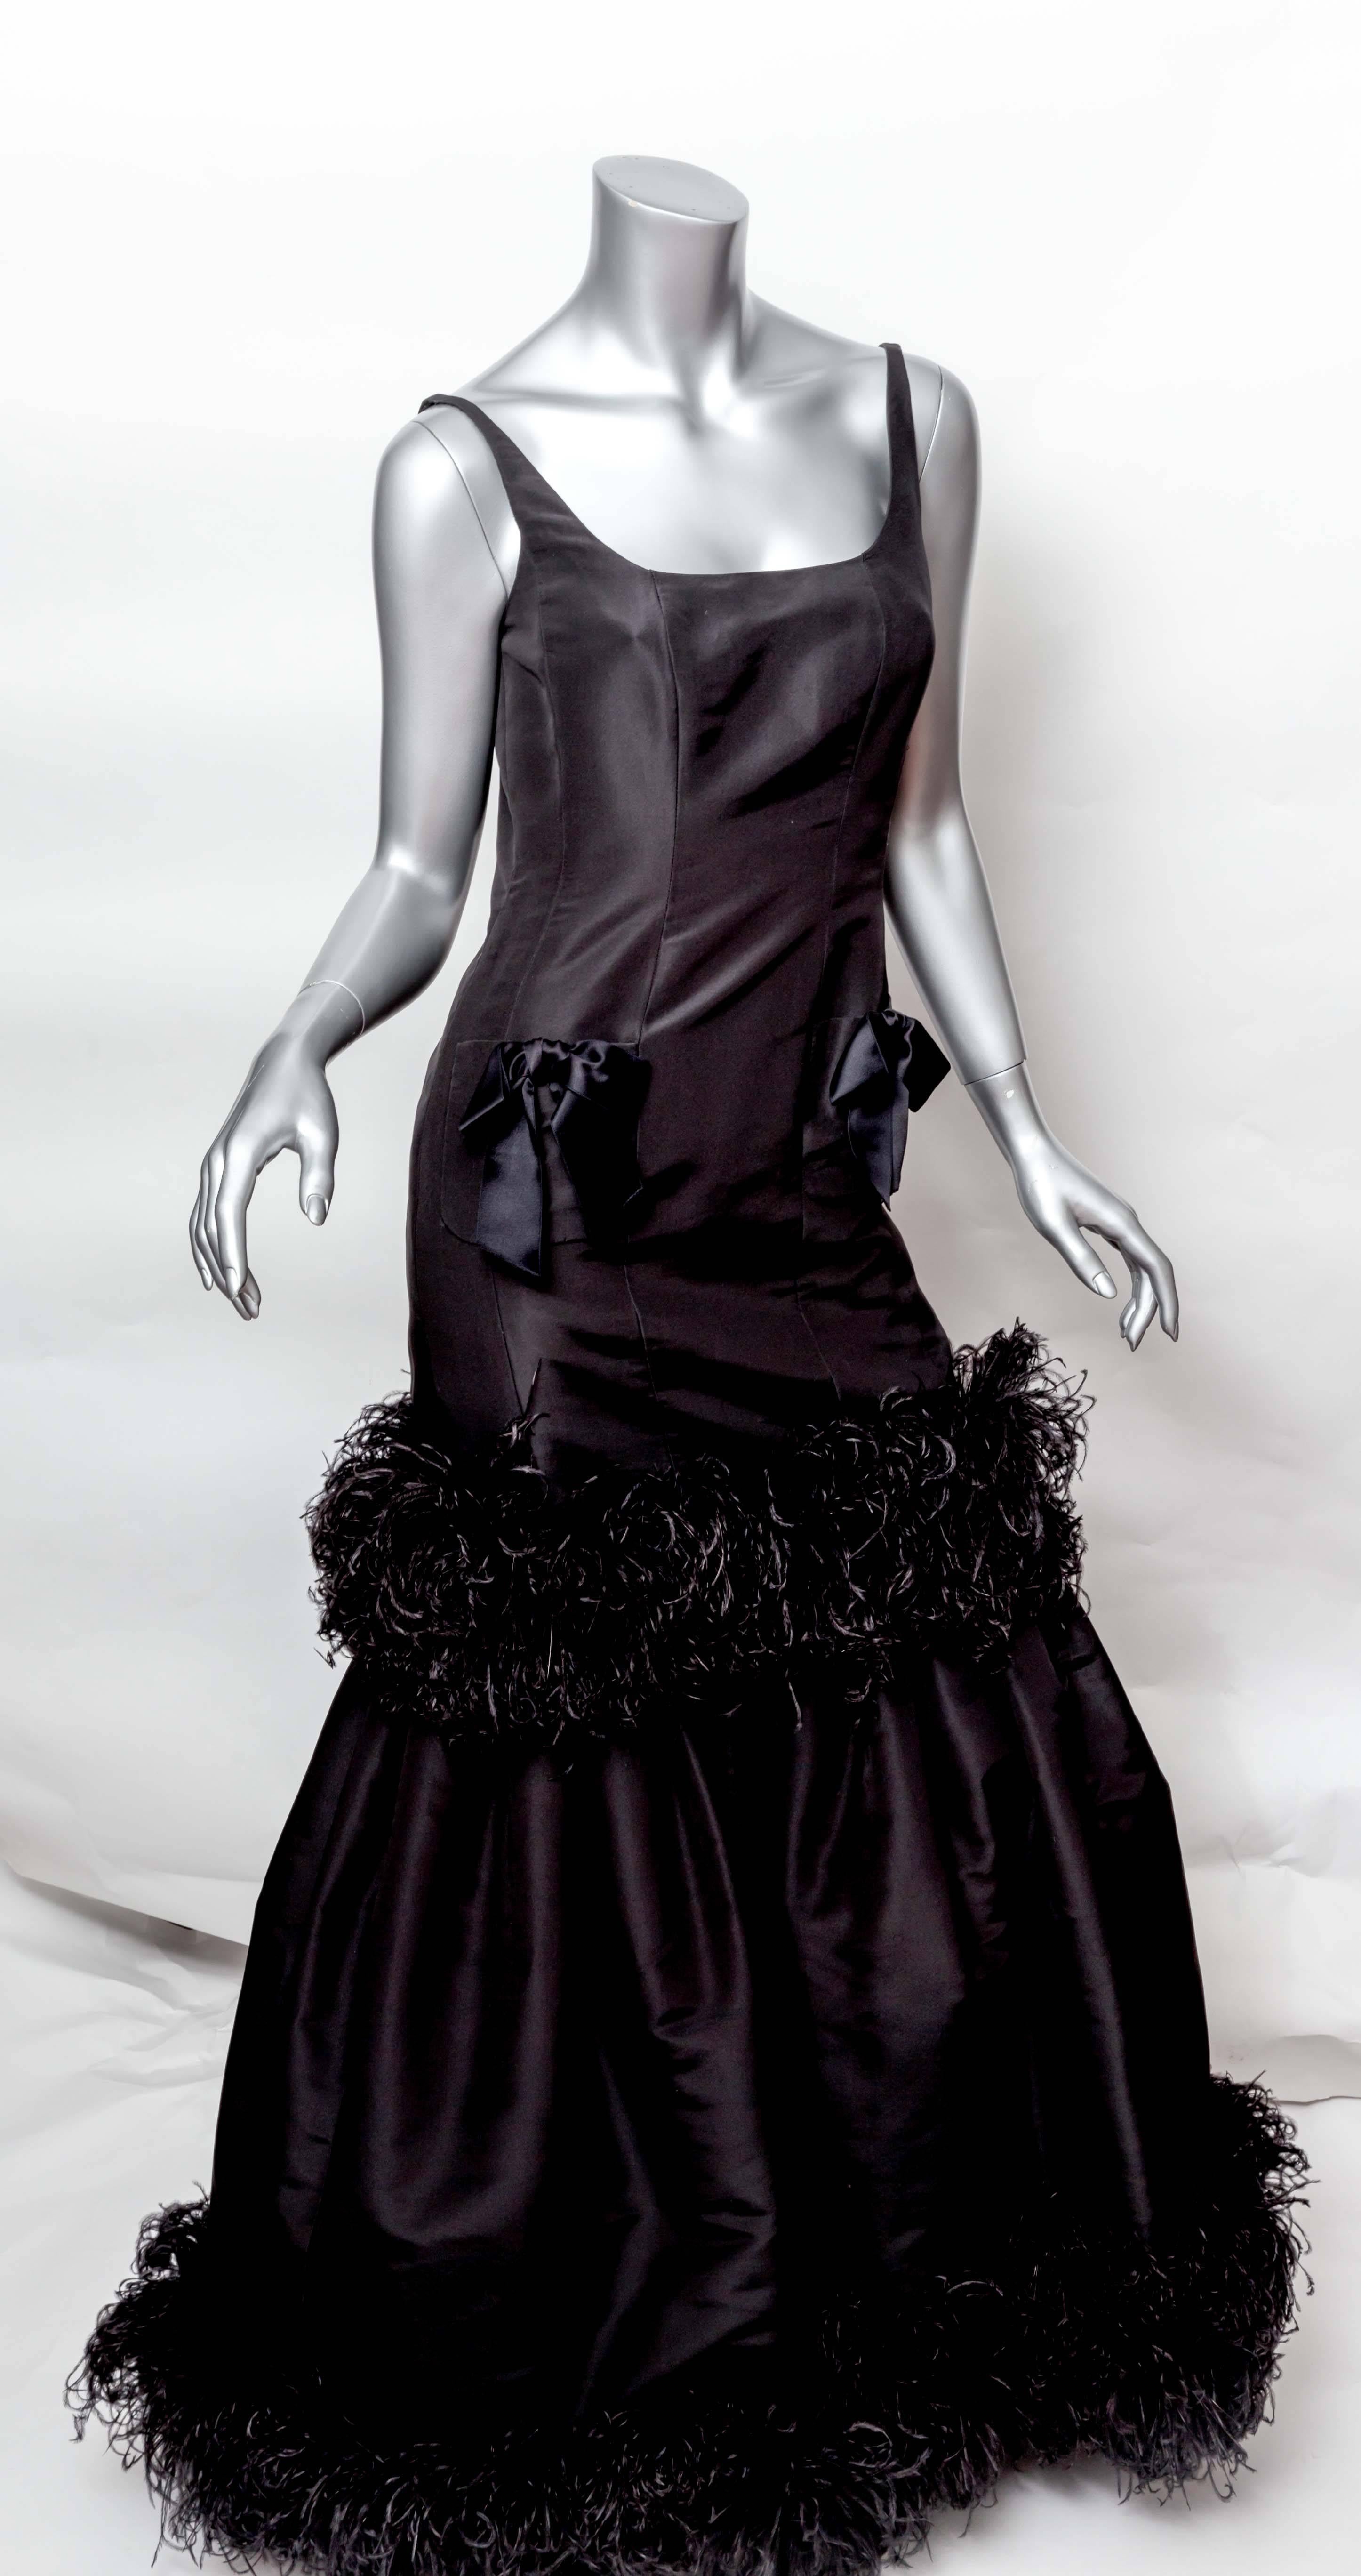 Black Silk Taffeta Ostrich Feather Evening Gown with Black Satin Bows. The Mermaid Silhouette is wonderfully flattering. 